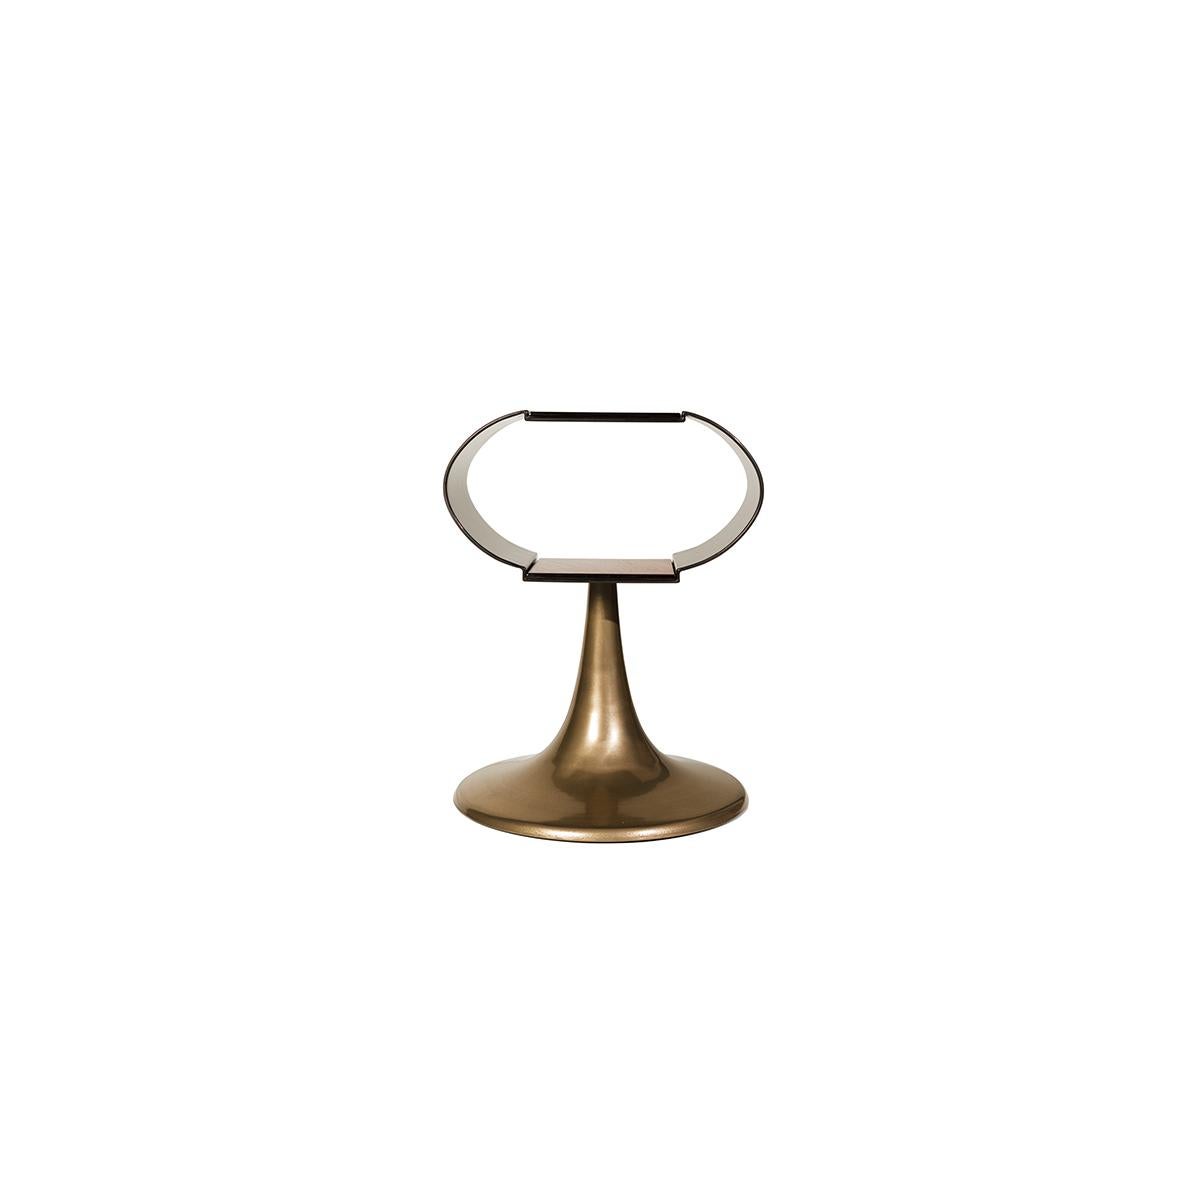 Handcrafted pedestal base design table made from bronze powder resin accented molded liquid metal. The open curved ellipse design of the tabletop creates a open effect with two parallel wood veneer surfaces.